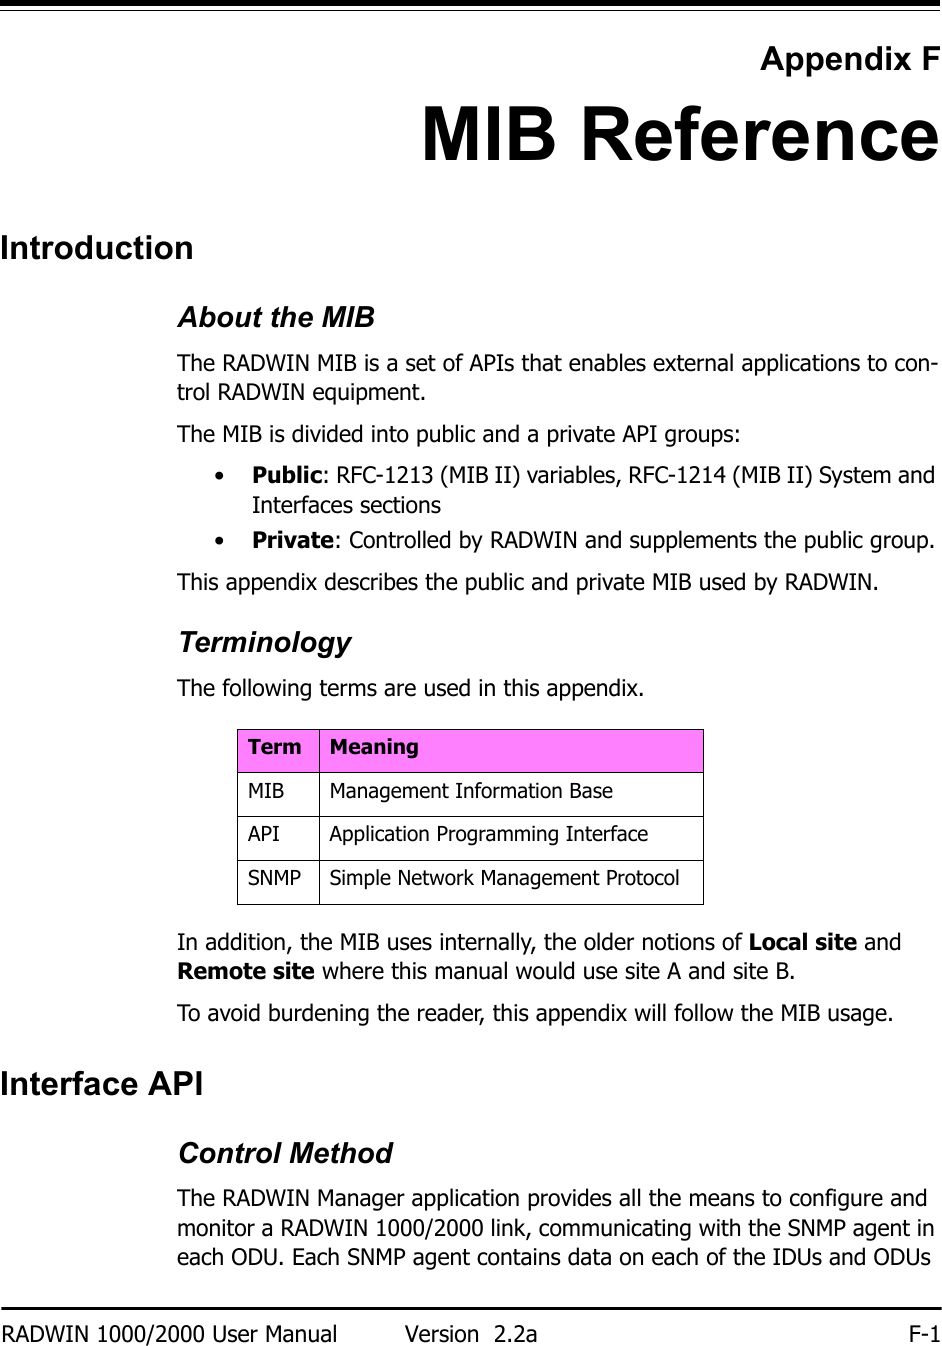 RADWIN 1000/2000 User Manual Version  2.2a F-1Appendix FMIB ReferenceIntroductionAbout the MIBThe RADWIN MIB is a set of APIs that enables external applications to con-trol RADWIN equipment.The MIB is divided into public and a private API groups:•Public: RFC-1213 (MIB II) variables, RFC-1214 (MIB II) System and Interfaces sections•Private: Controlled by RADWIN and supplements the public group.This appendix describes the public and private MIB used by RADWIN.TerminologyThe following terms are used in this appendix.In addition, the MIB uses internally, the older notions of Local site and Remote site where this manual would use site A and site B.To avoid burdening the reader, this appendix will follow the MIB usage.Interface APIControl MethodThe RADWIN Manager application provides all the means to configure and monitor a RADWIN 1000/2000 link, communicating with the SNMP agent in each ODU. Each SNMP agent contains data on each of the IDUs and ODUs Term MeaningMIB Management Information BaseAPI Application Programming InterfaceSNMP Simple Network Management Protocol